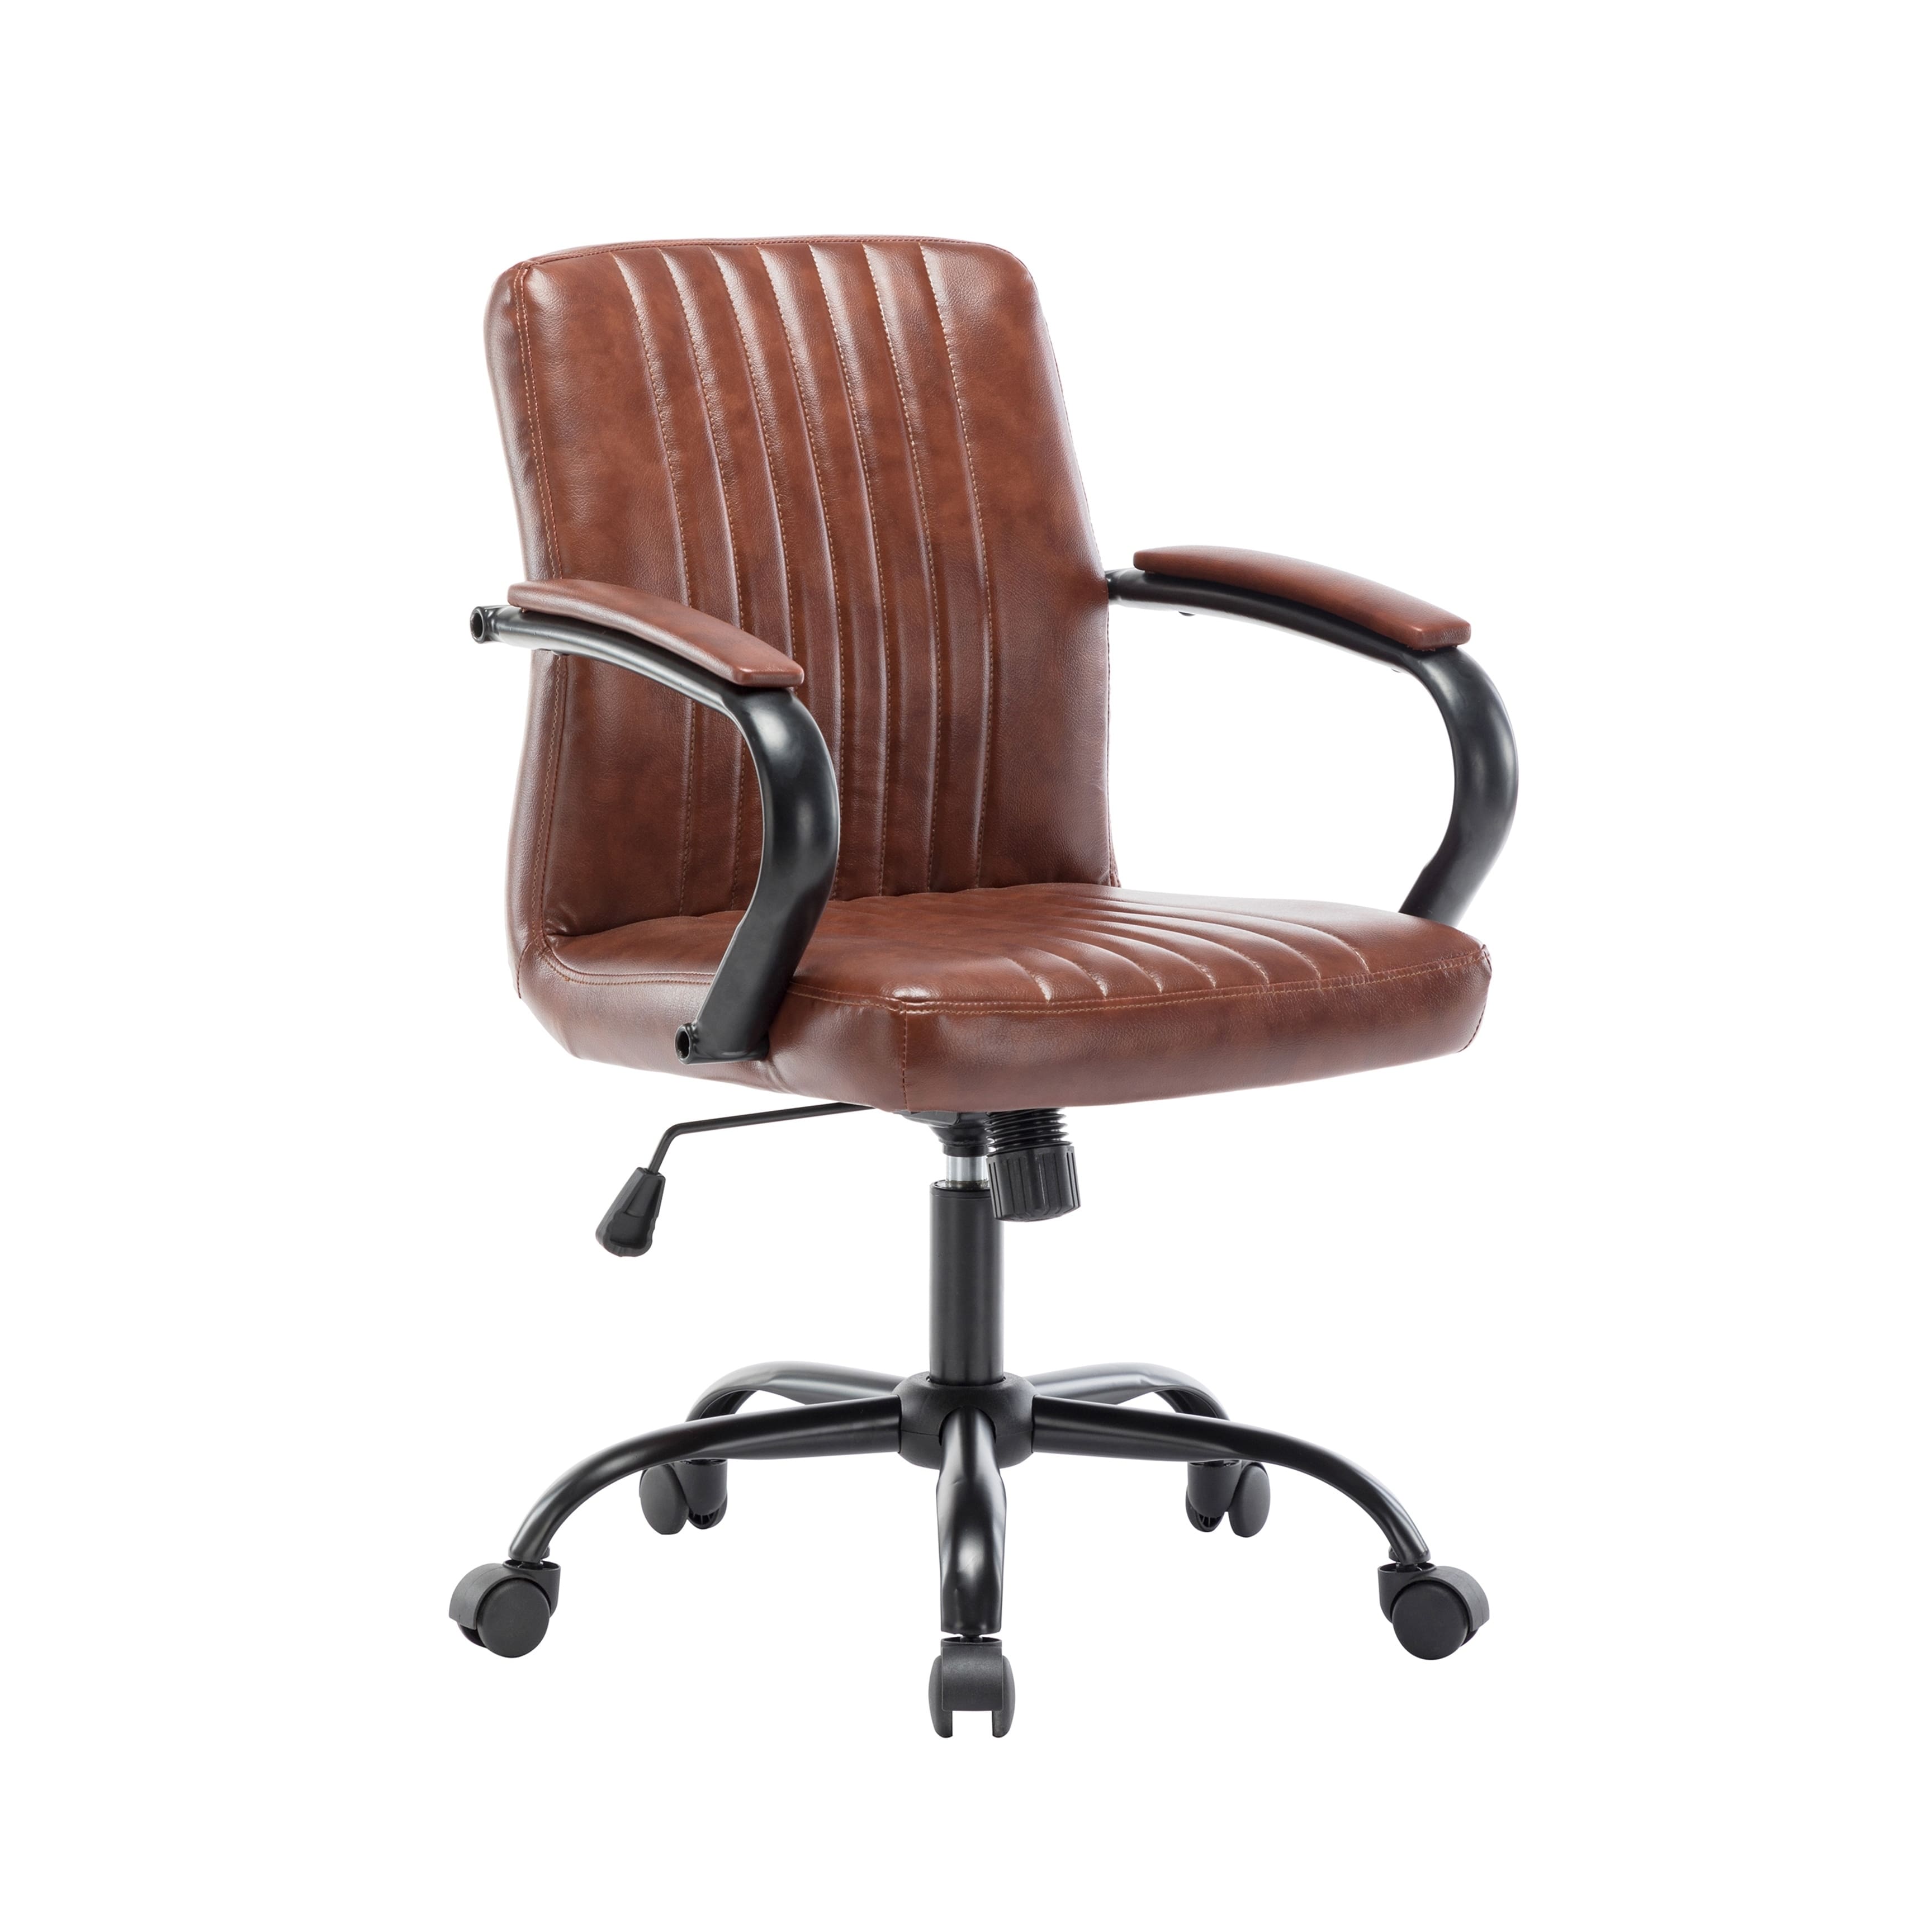 Porthos Home Palmer Swivel Office Chair Ribbed PU Leather Upholstery 648c8c83 1dc8 4c83 Aa8e 37a9eb252c0b ?impolicy=medium